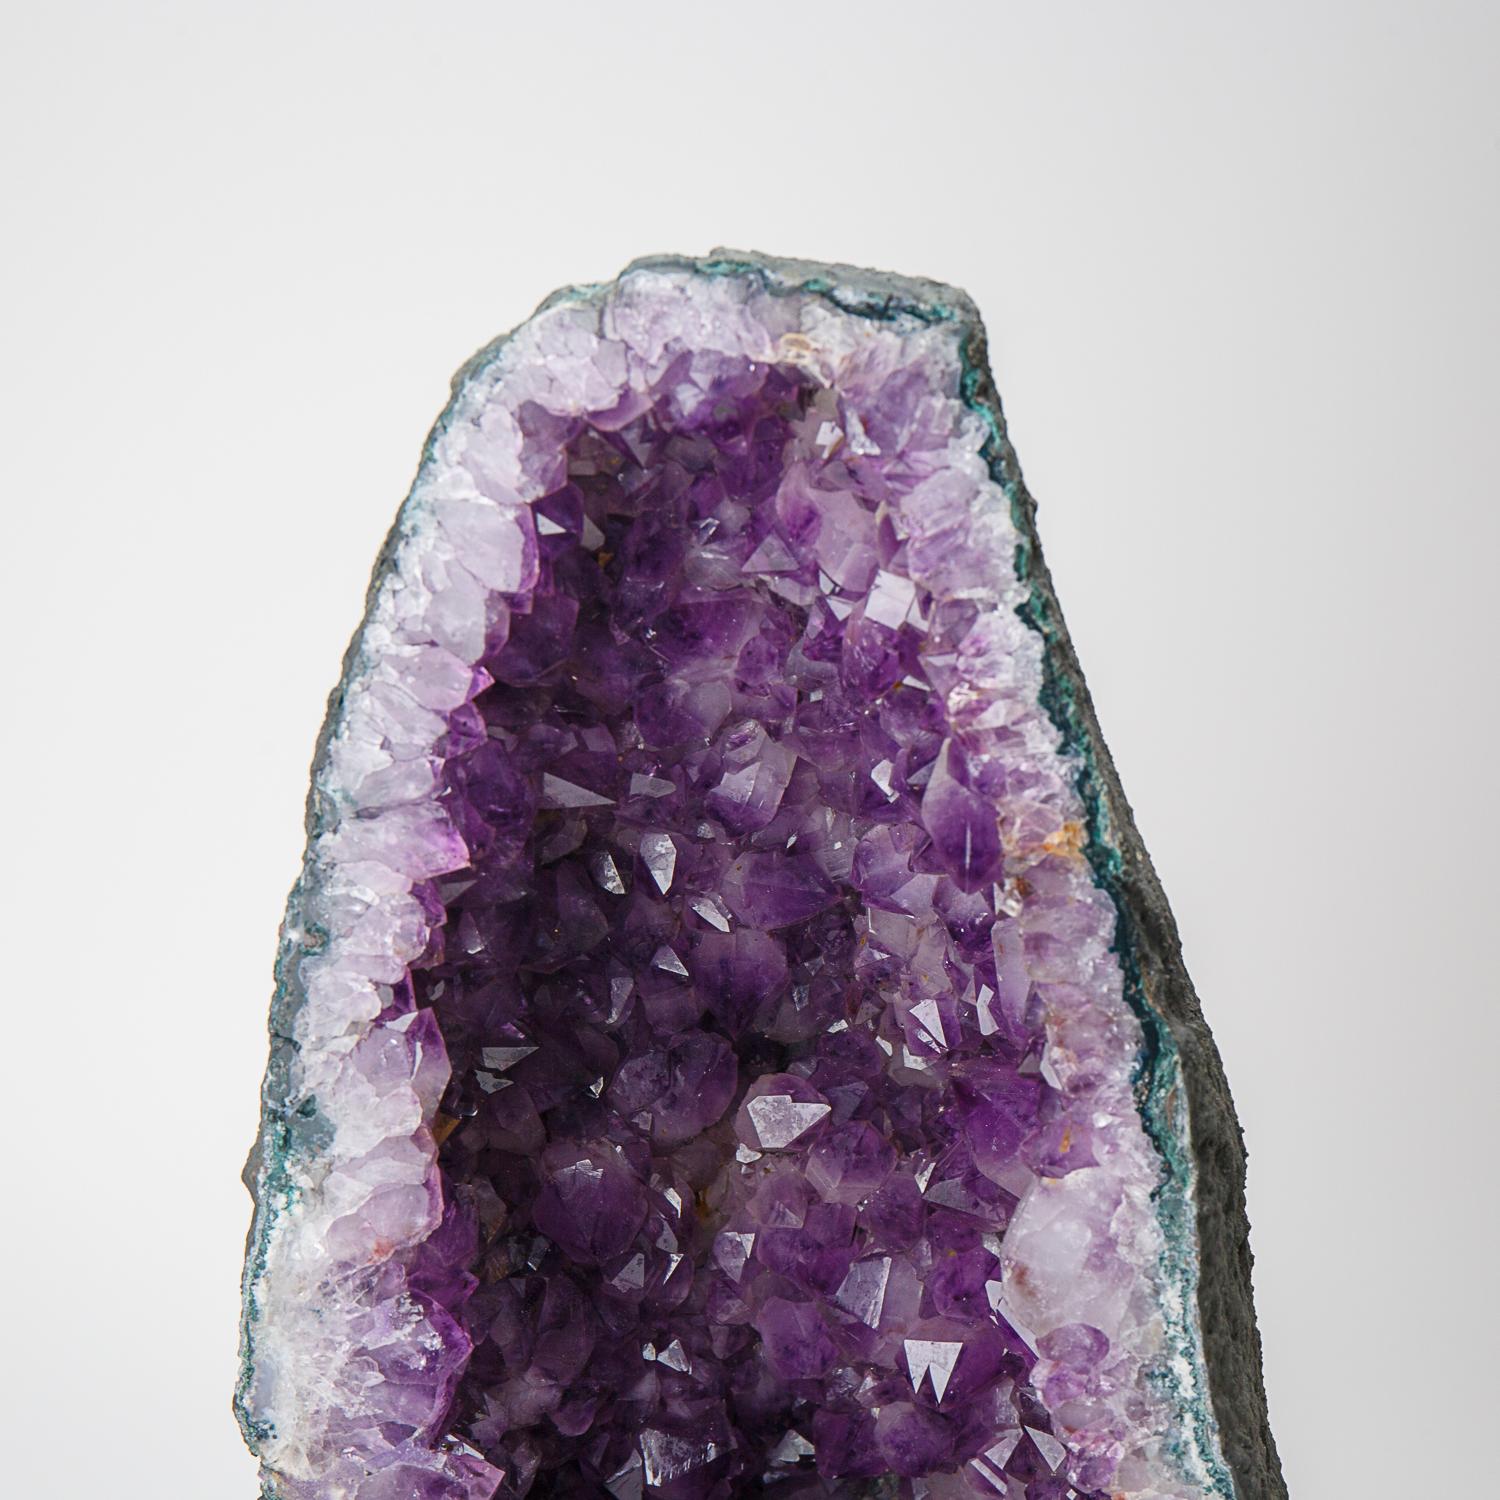 Contemporary Genuine Amethyst Cluster Geode from Brazil (49 lbs)